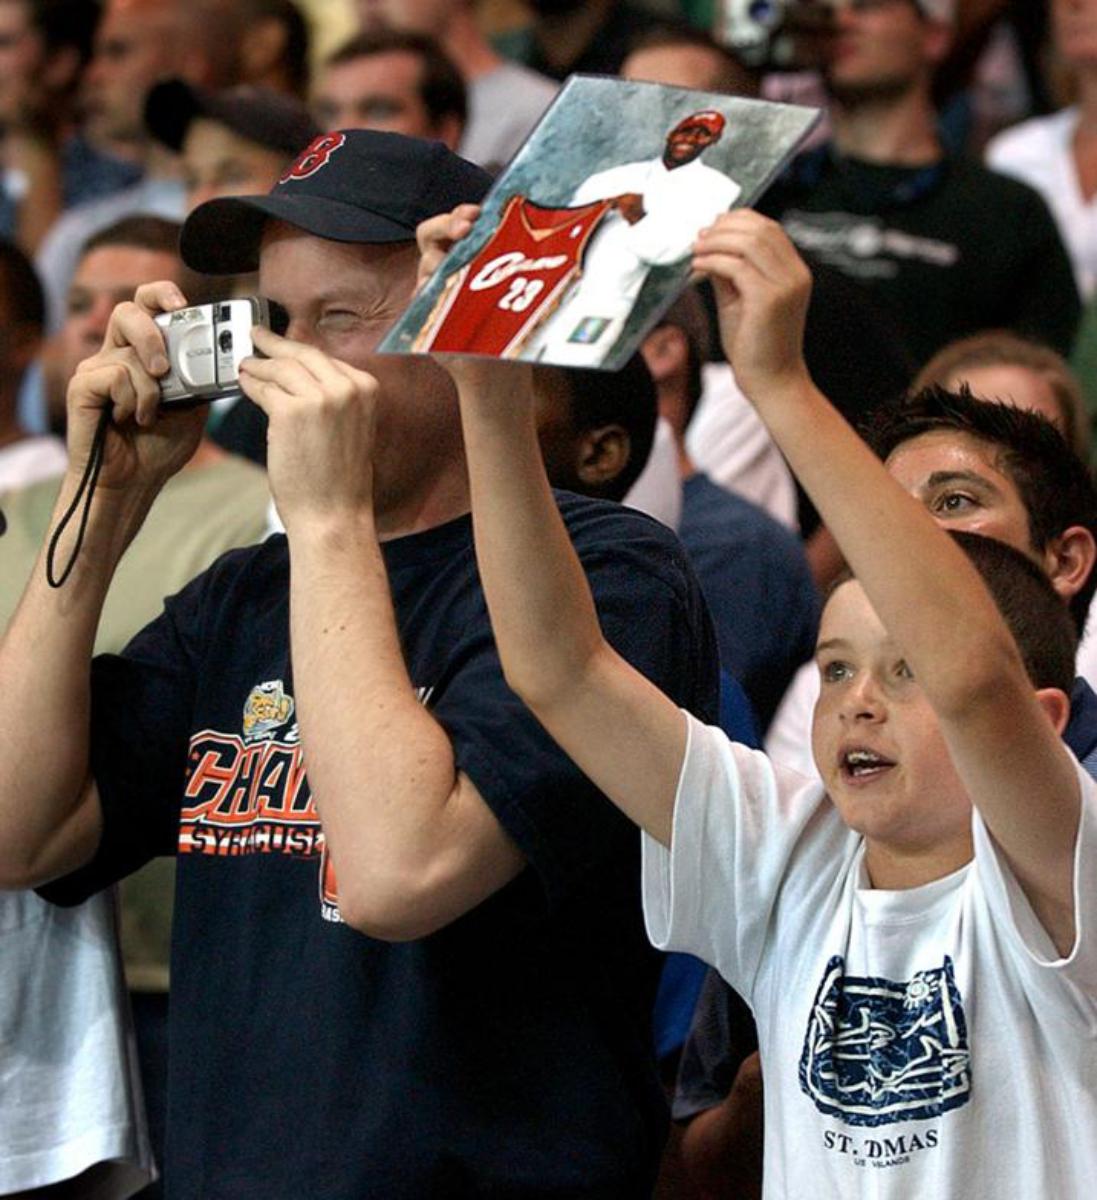 It was hard to tell LeBron fans from Boston fans at the 2003 Boston summer league.